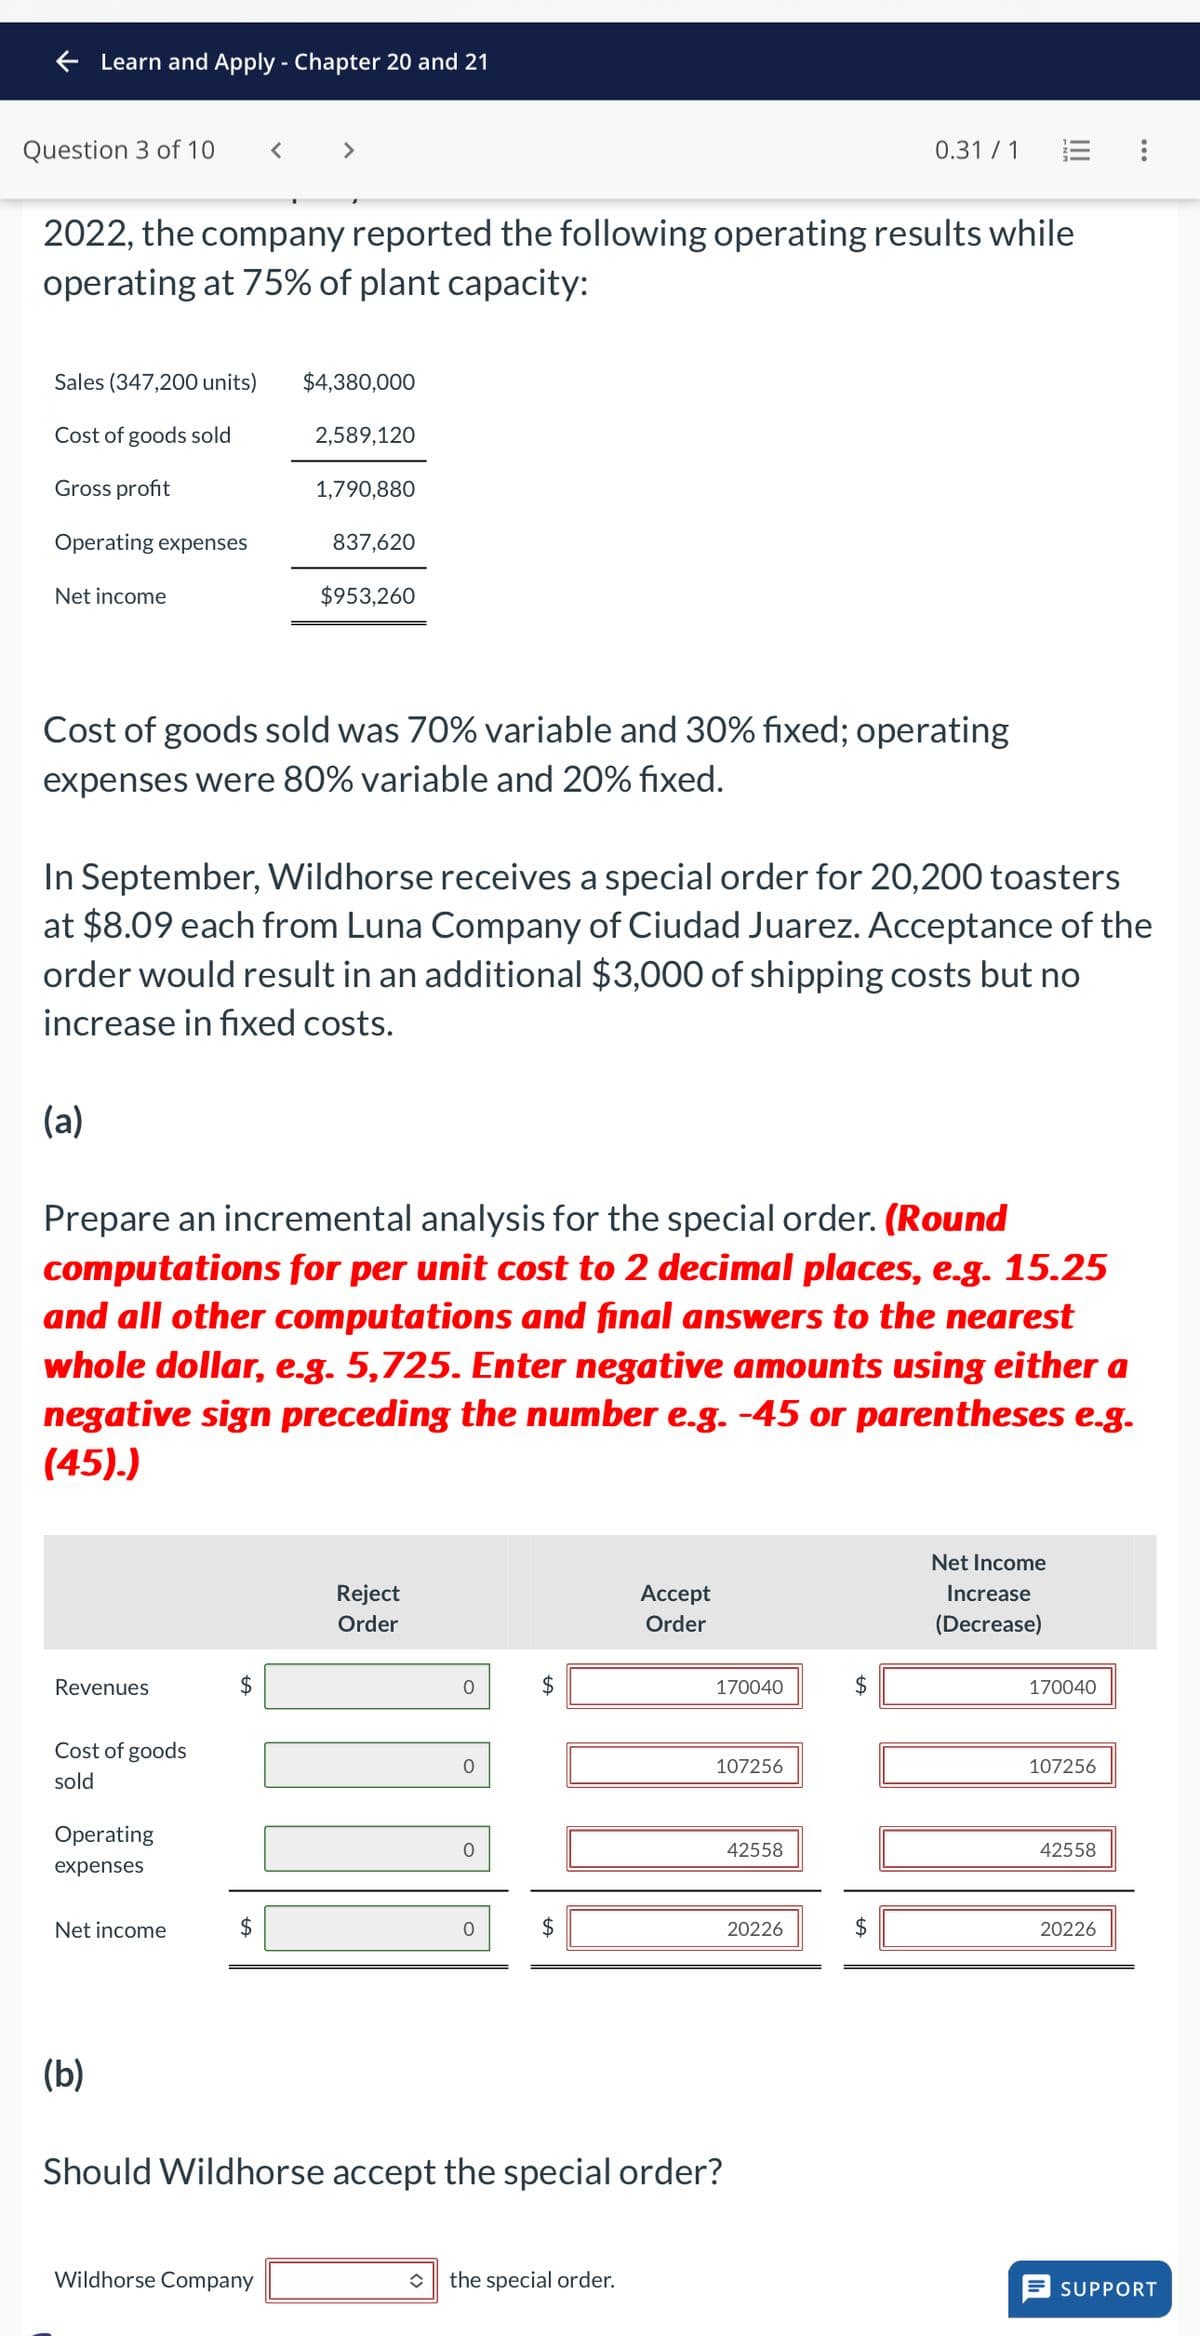 Learn and Apply - Chapter 20 and 21
Question 3 of 10
0.31/1
2022, the company reported the following operating results while
operating at 75% of plant capacity:
Sales (347,200 units)
$4,380,000
Cost of goods sold
2,589,120
Gross profit
1,790,880
Operating expenses
837,620
Net income
$953,260
Cost of goods sold was 70% variable and 30% fixed; operating
expenses were 80% variable and 20% fixed.
In September, Wildhorse receives a special order for 20,200 toasters
at $8.09 each from Luna Company of Ciudad Juarez. Acceptance of the
order would result in an additional $3,000 of shipping costs but no
increase in fixed costs.
(a)
Prepare an incremental analysis for the special order. (Round
computations for per unit cost to 2 decimal places, e.g. 15.25
and all other computations and final answers to the nearest
whole dollar, e.g. 5,725. Enter negative amounts using either a
negative sign preceding the number e.g. -45 or parentheses e.g.
(45).)
Revenues
Cost of goods
sold
Operating
expenses
Net income
(b)
Reject
Order
$
Accept
Order
170040
$
107256
42558
$
20226
Should Wildhorse accept the special order?
Wildhorse Company
the special order.
Net Income
Increase
(Decrease)
170040
107256
42558
SA
$
20226
SUPPORT